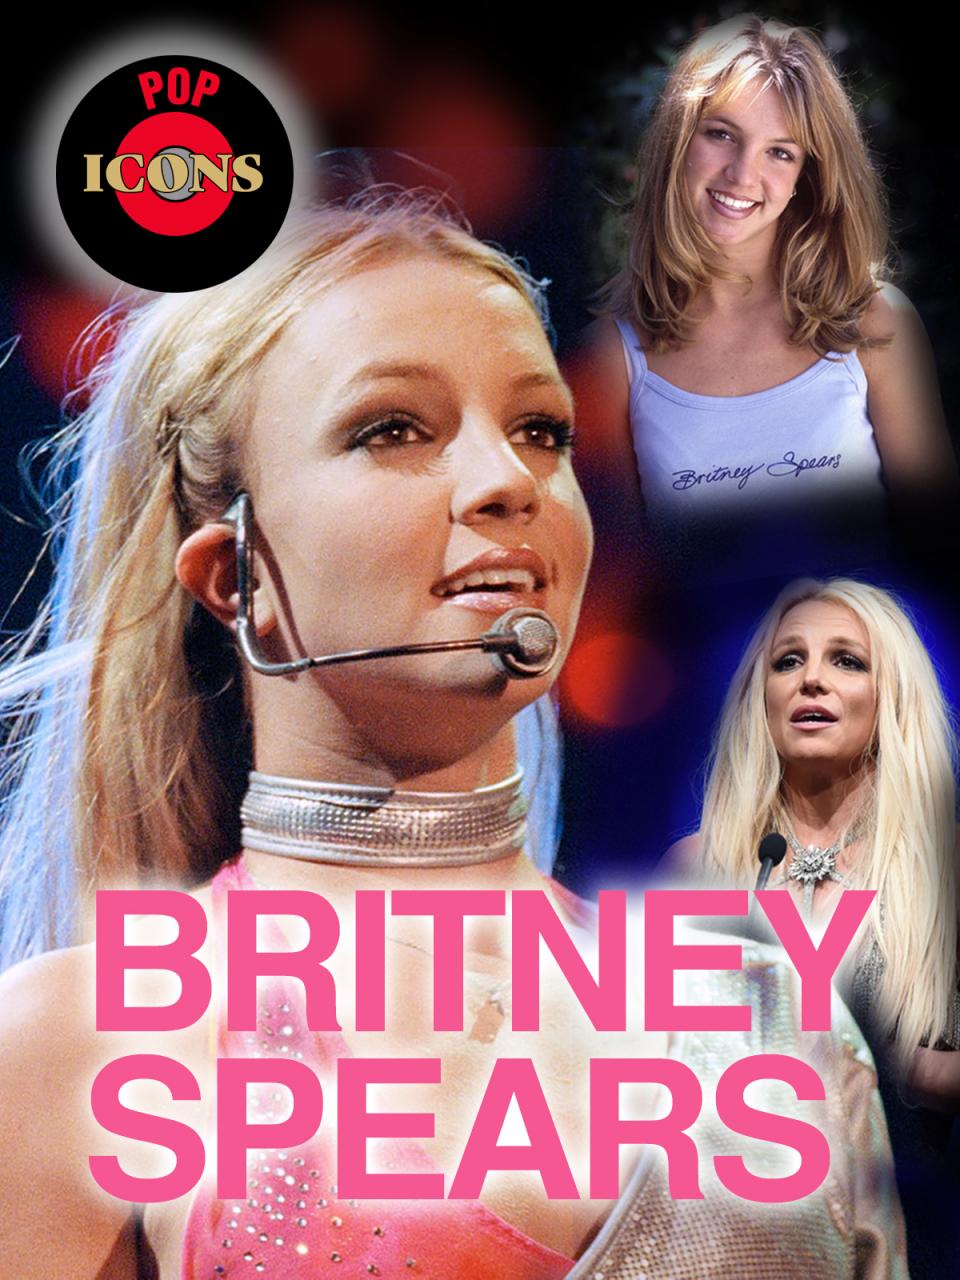 Pop Icons: Britney Spears